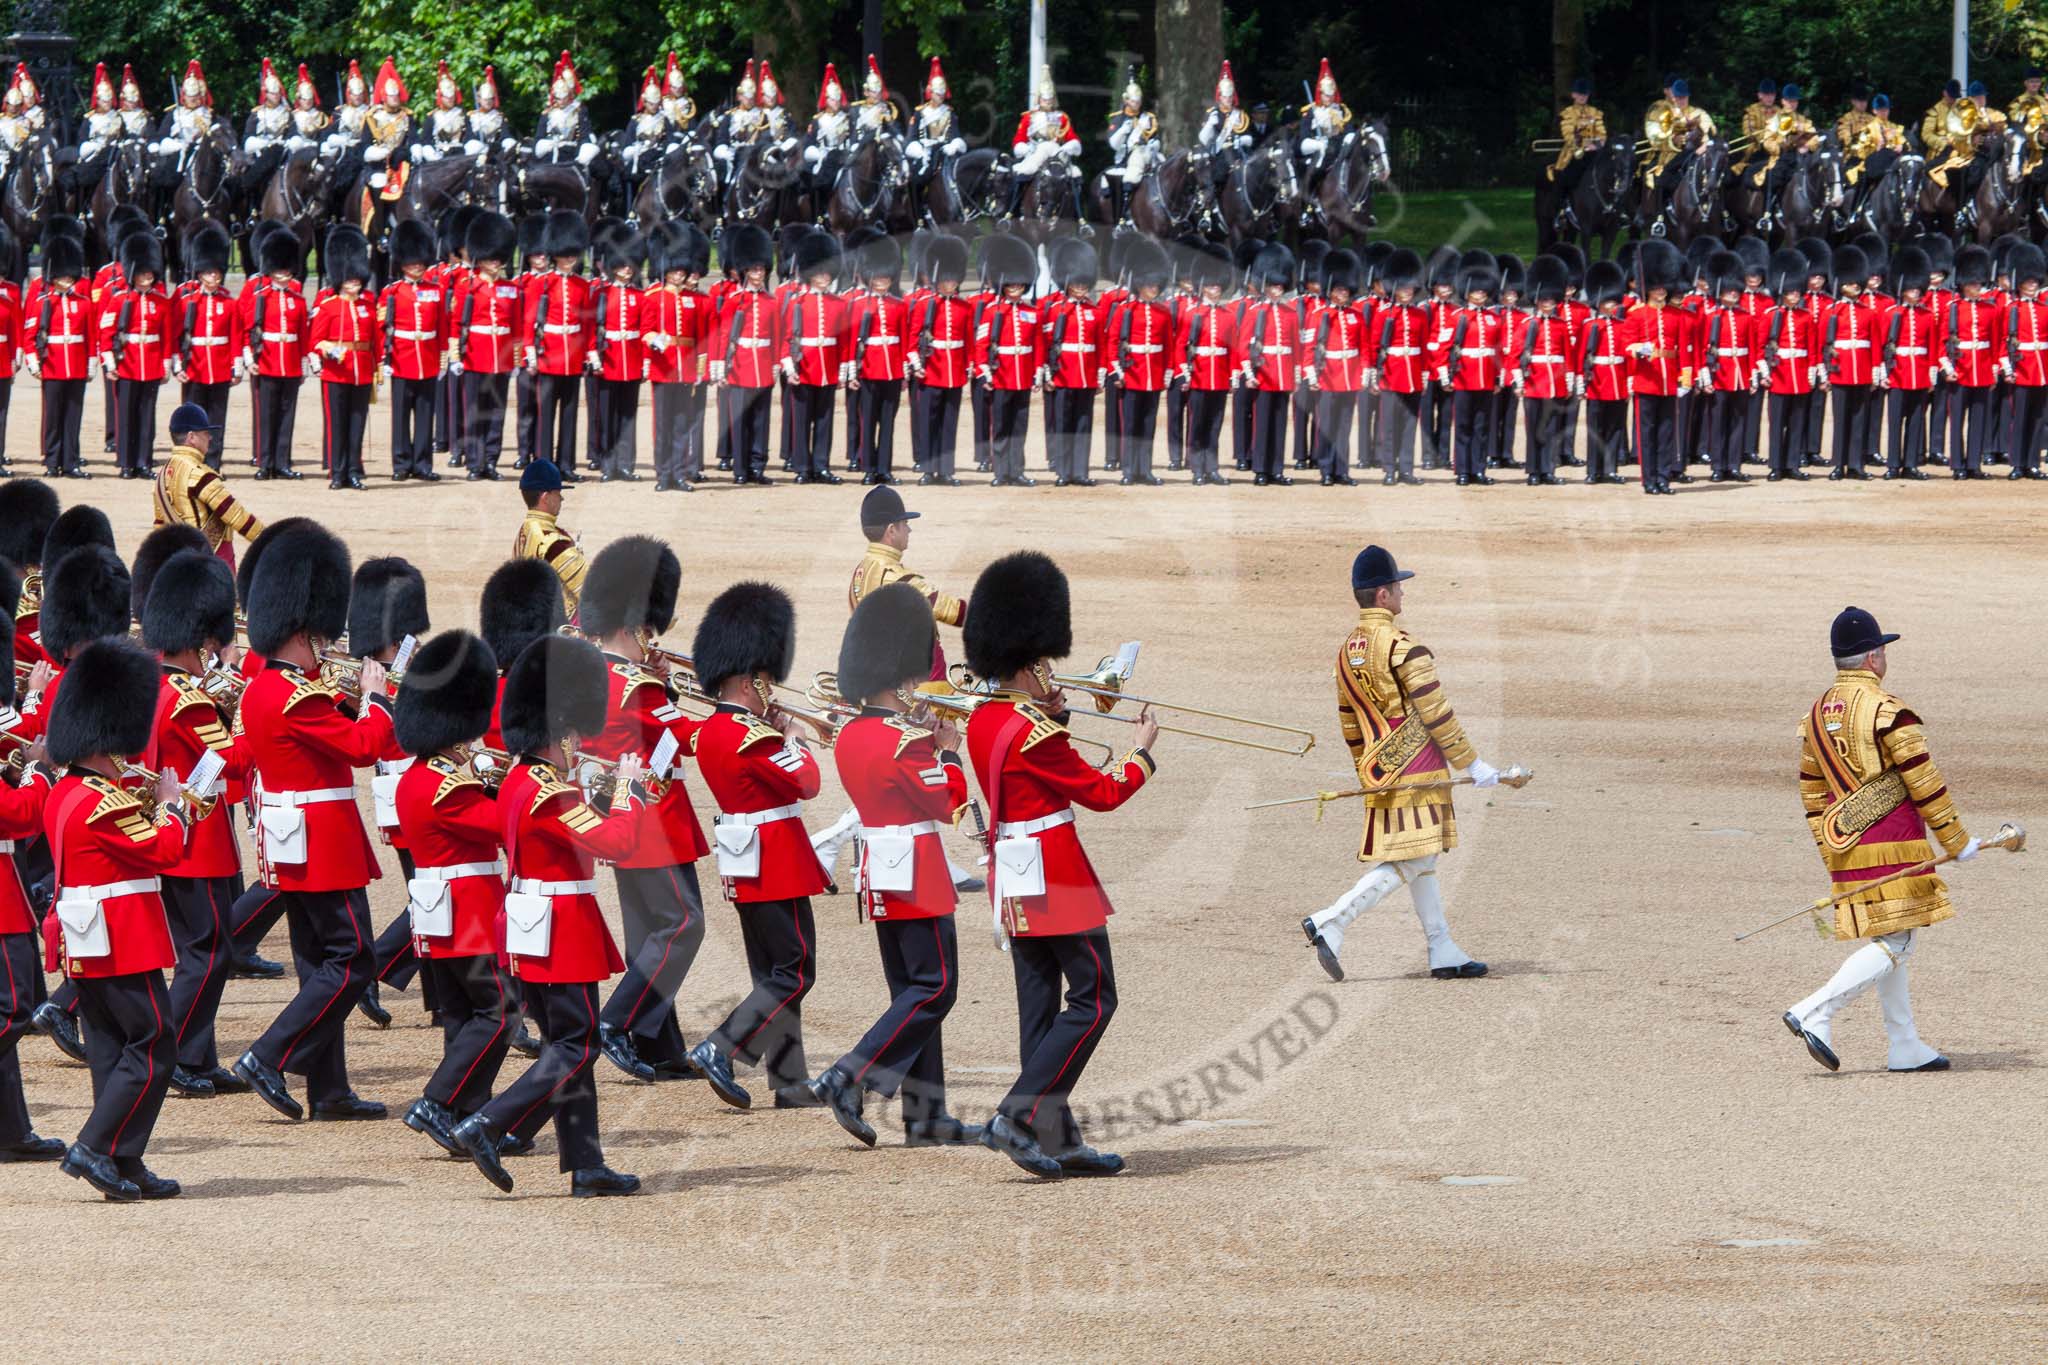 Trooping the Colour 2013: The Massed Band Troop begins with the slow march - the Waltz from Les Huguenots. The Third and Fourth Division of the Sovereign's Escort, The Blues and Royals, can be seen on top of the image. Image #397, 15 June 2013 11:10 Horse Guards Parade, London, UK